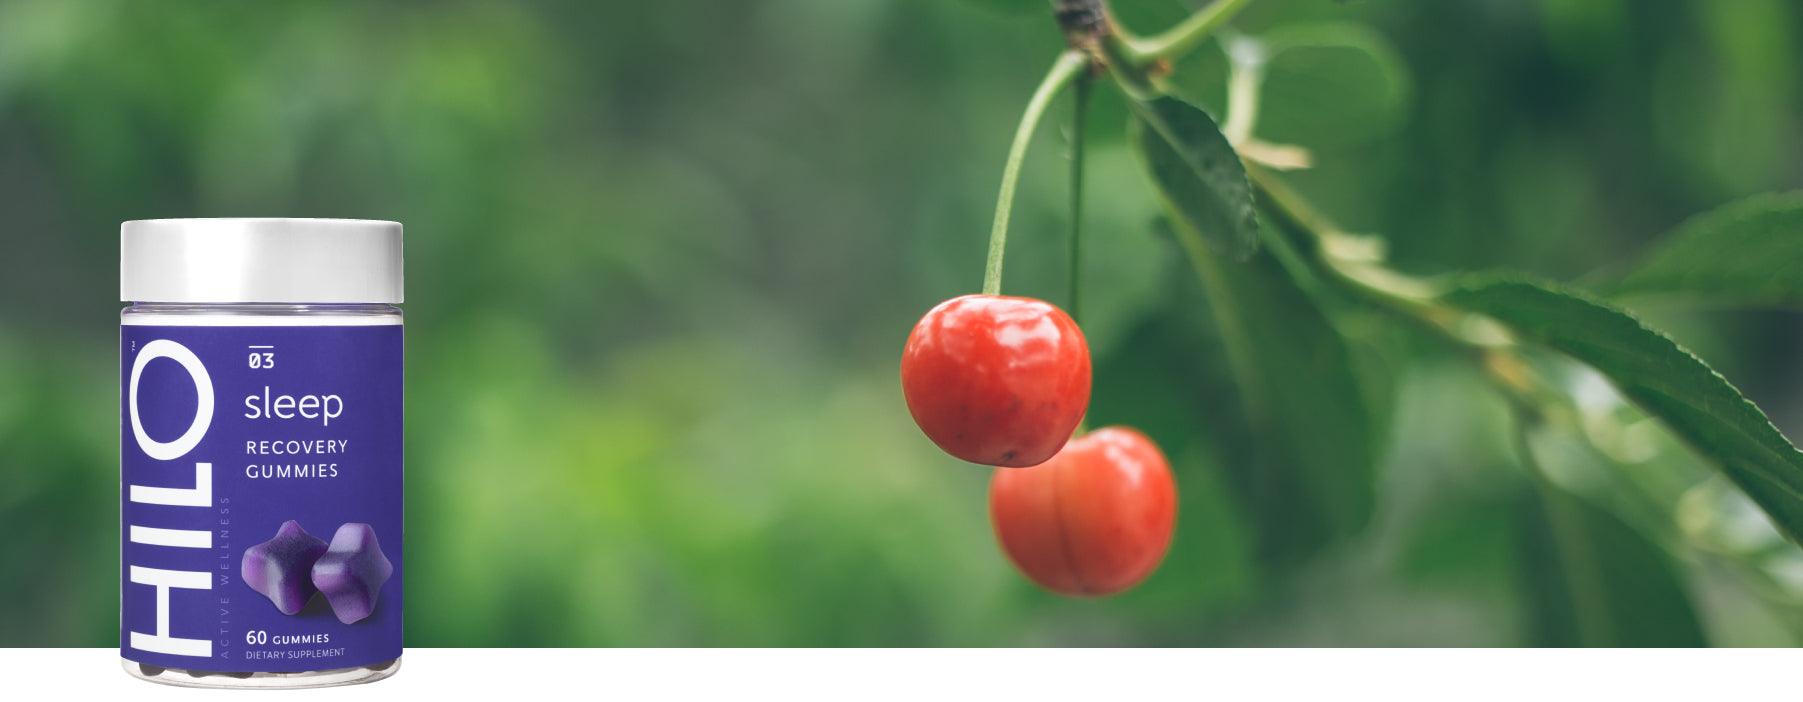 Tart Cherry: Benefits, Uses, and Risks - Hilo Nutrition